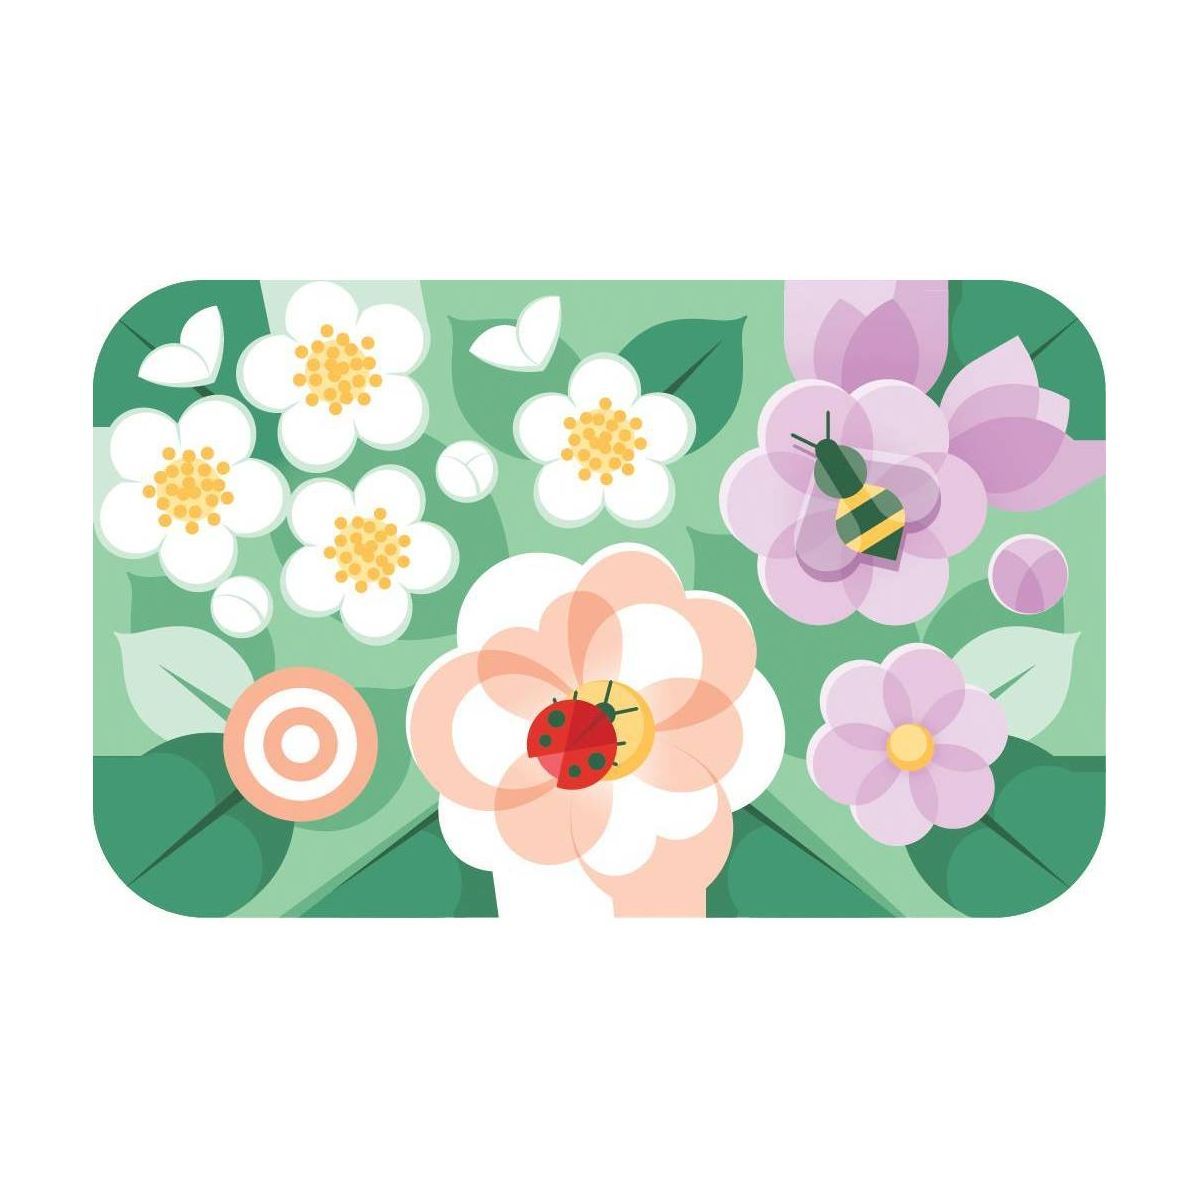 Floral Bouquet Target GiftCard $10 | Target